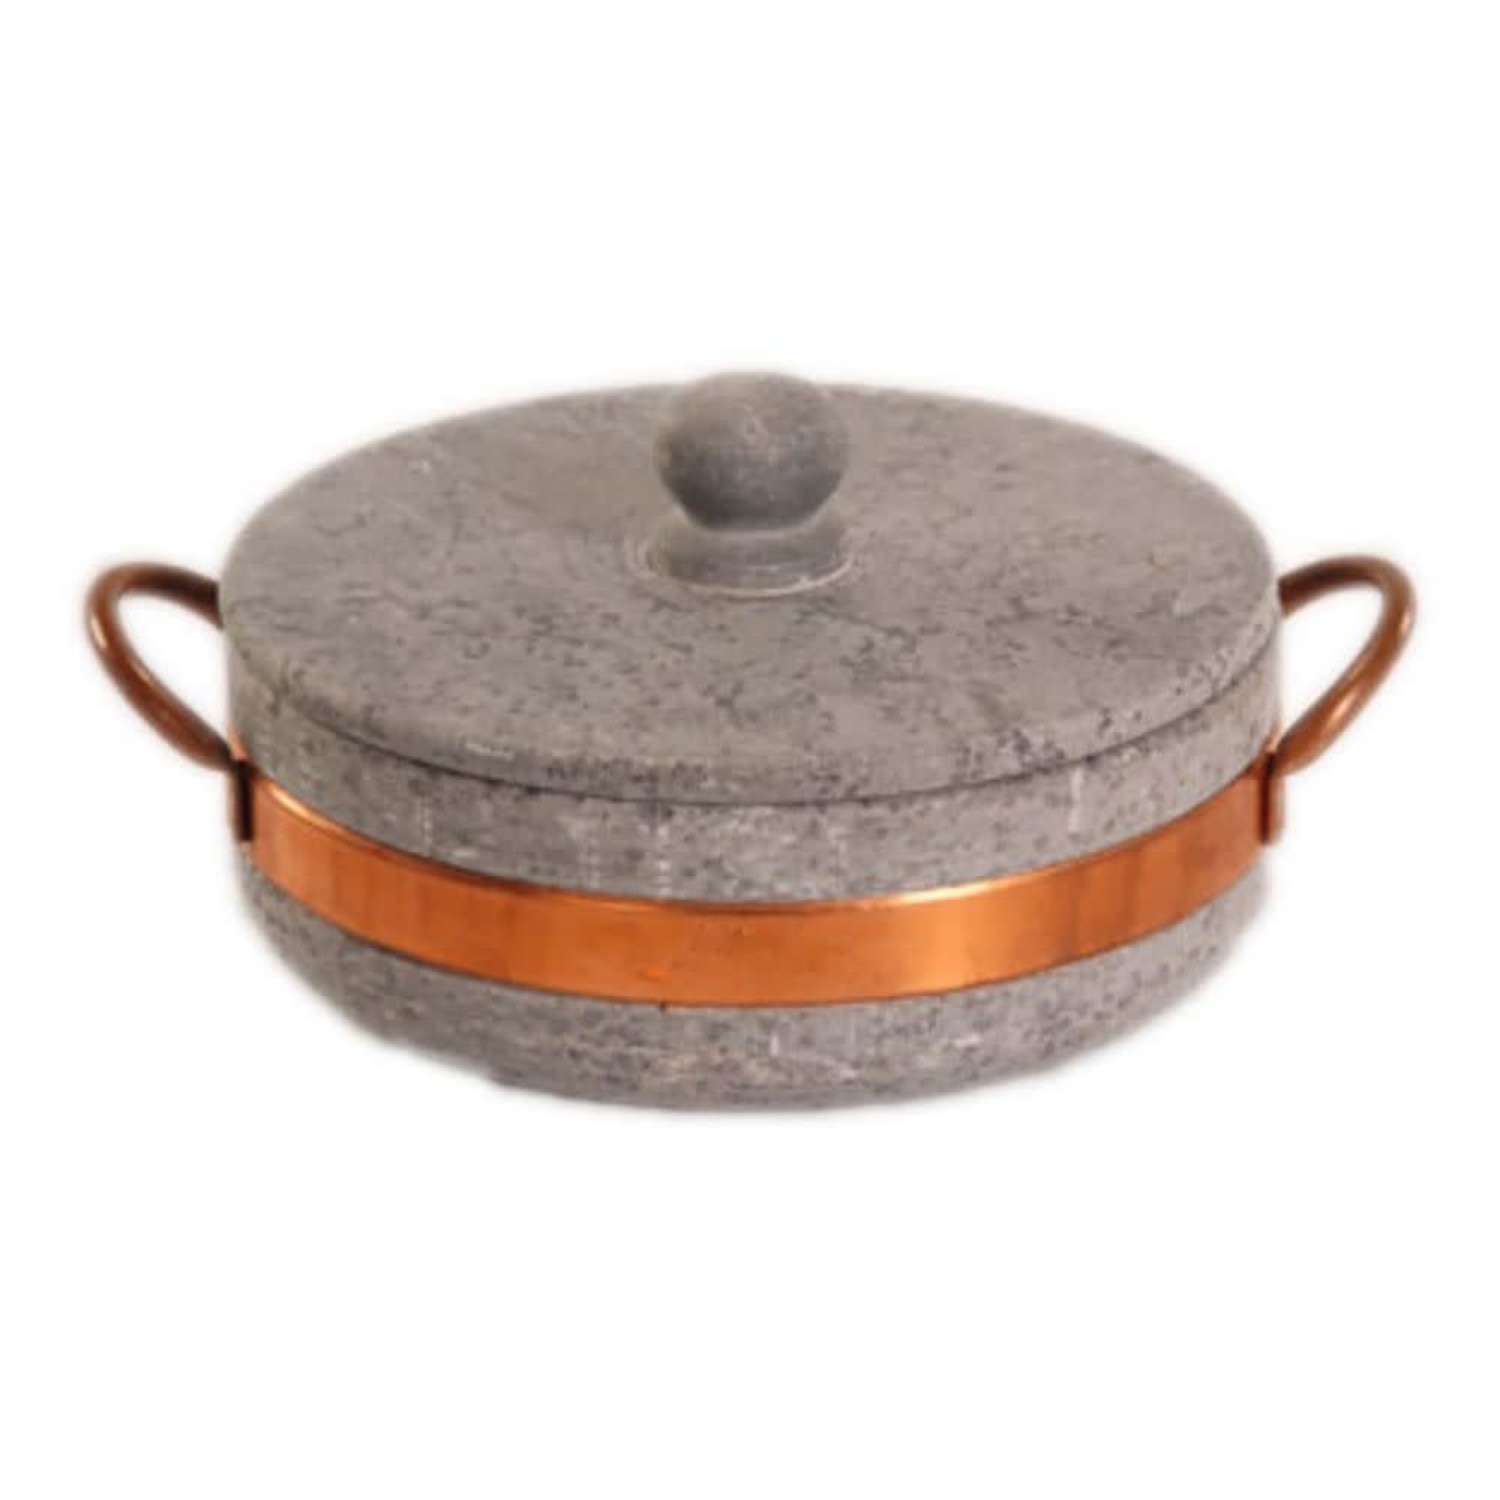 Brazilian Home Soapstone Sauté Pan with Lid - Whisk